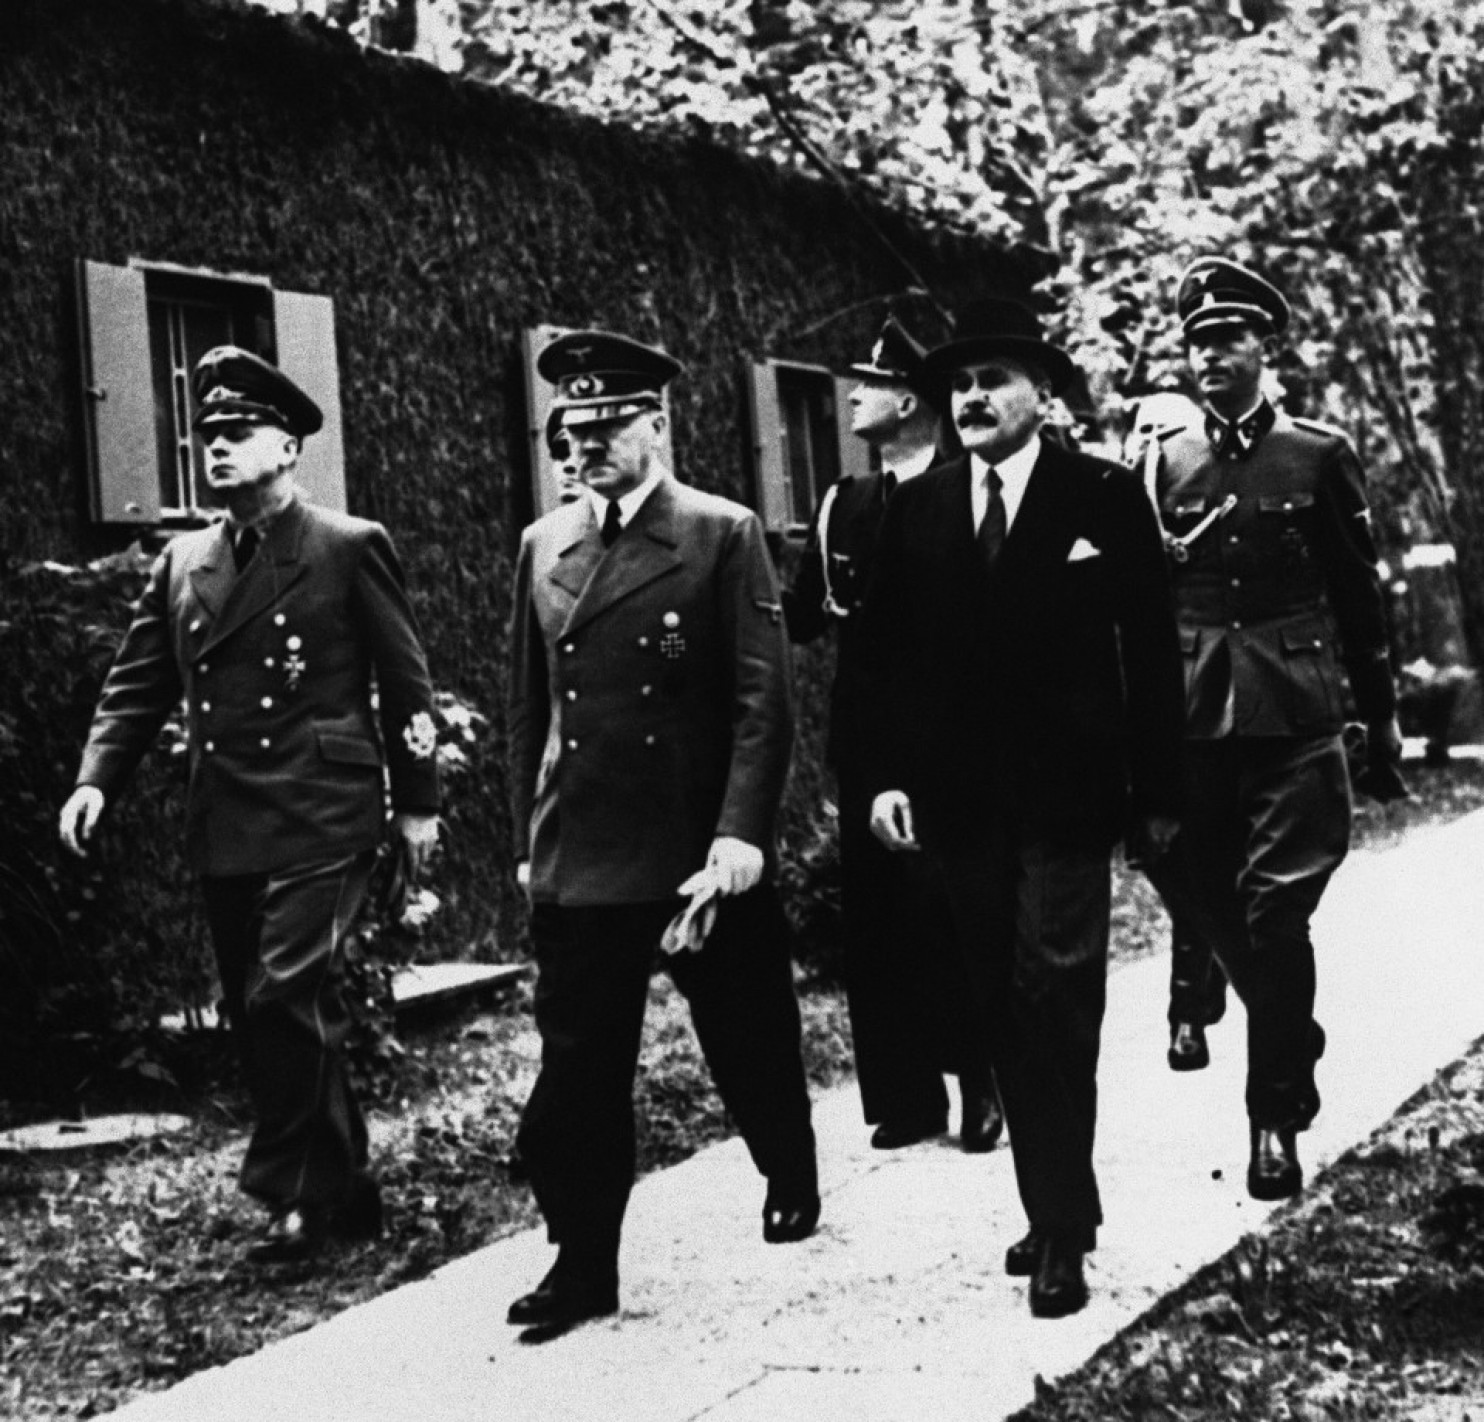  A photo of Hitler obtained by the Associated Press under its arrangement with the Nazis. (AP Photo)